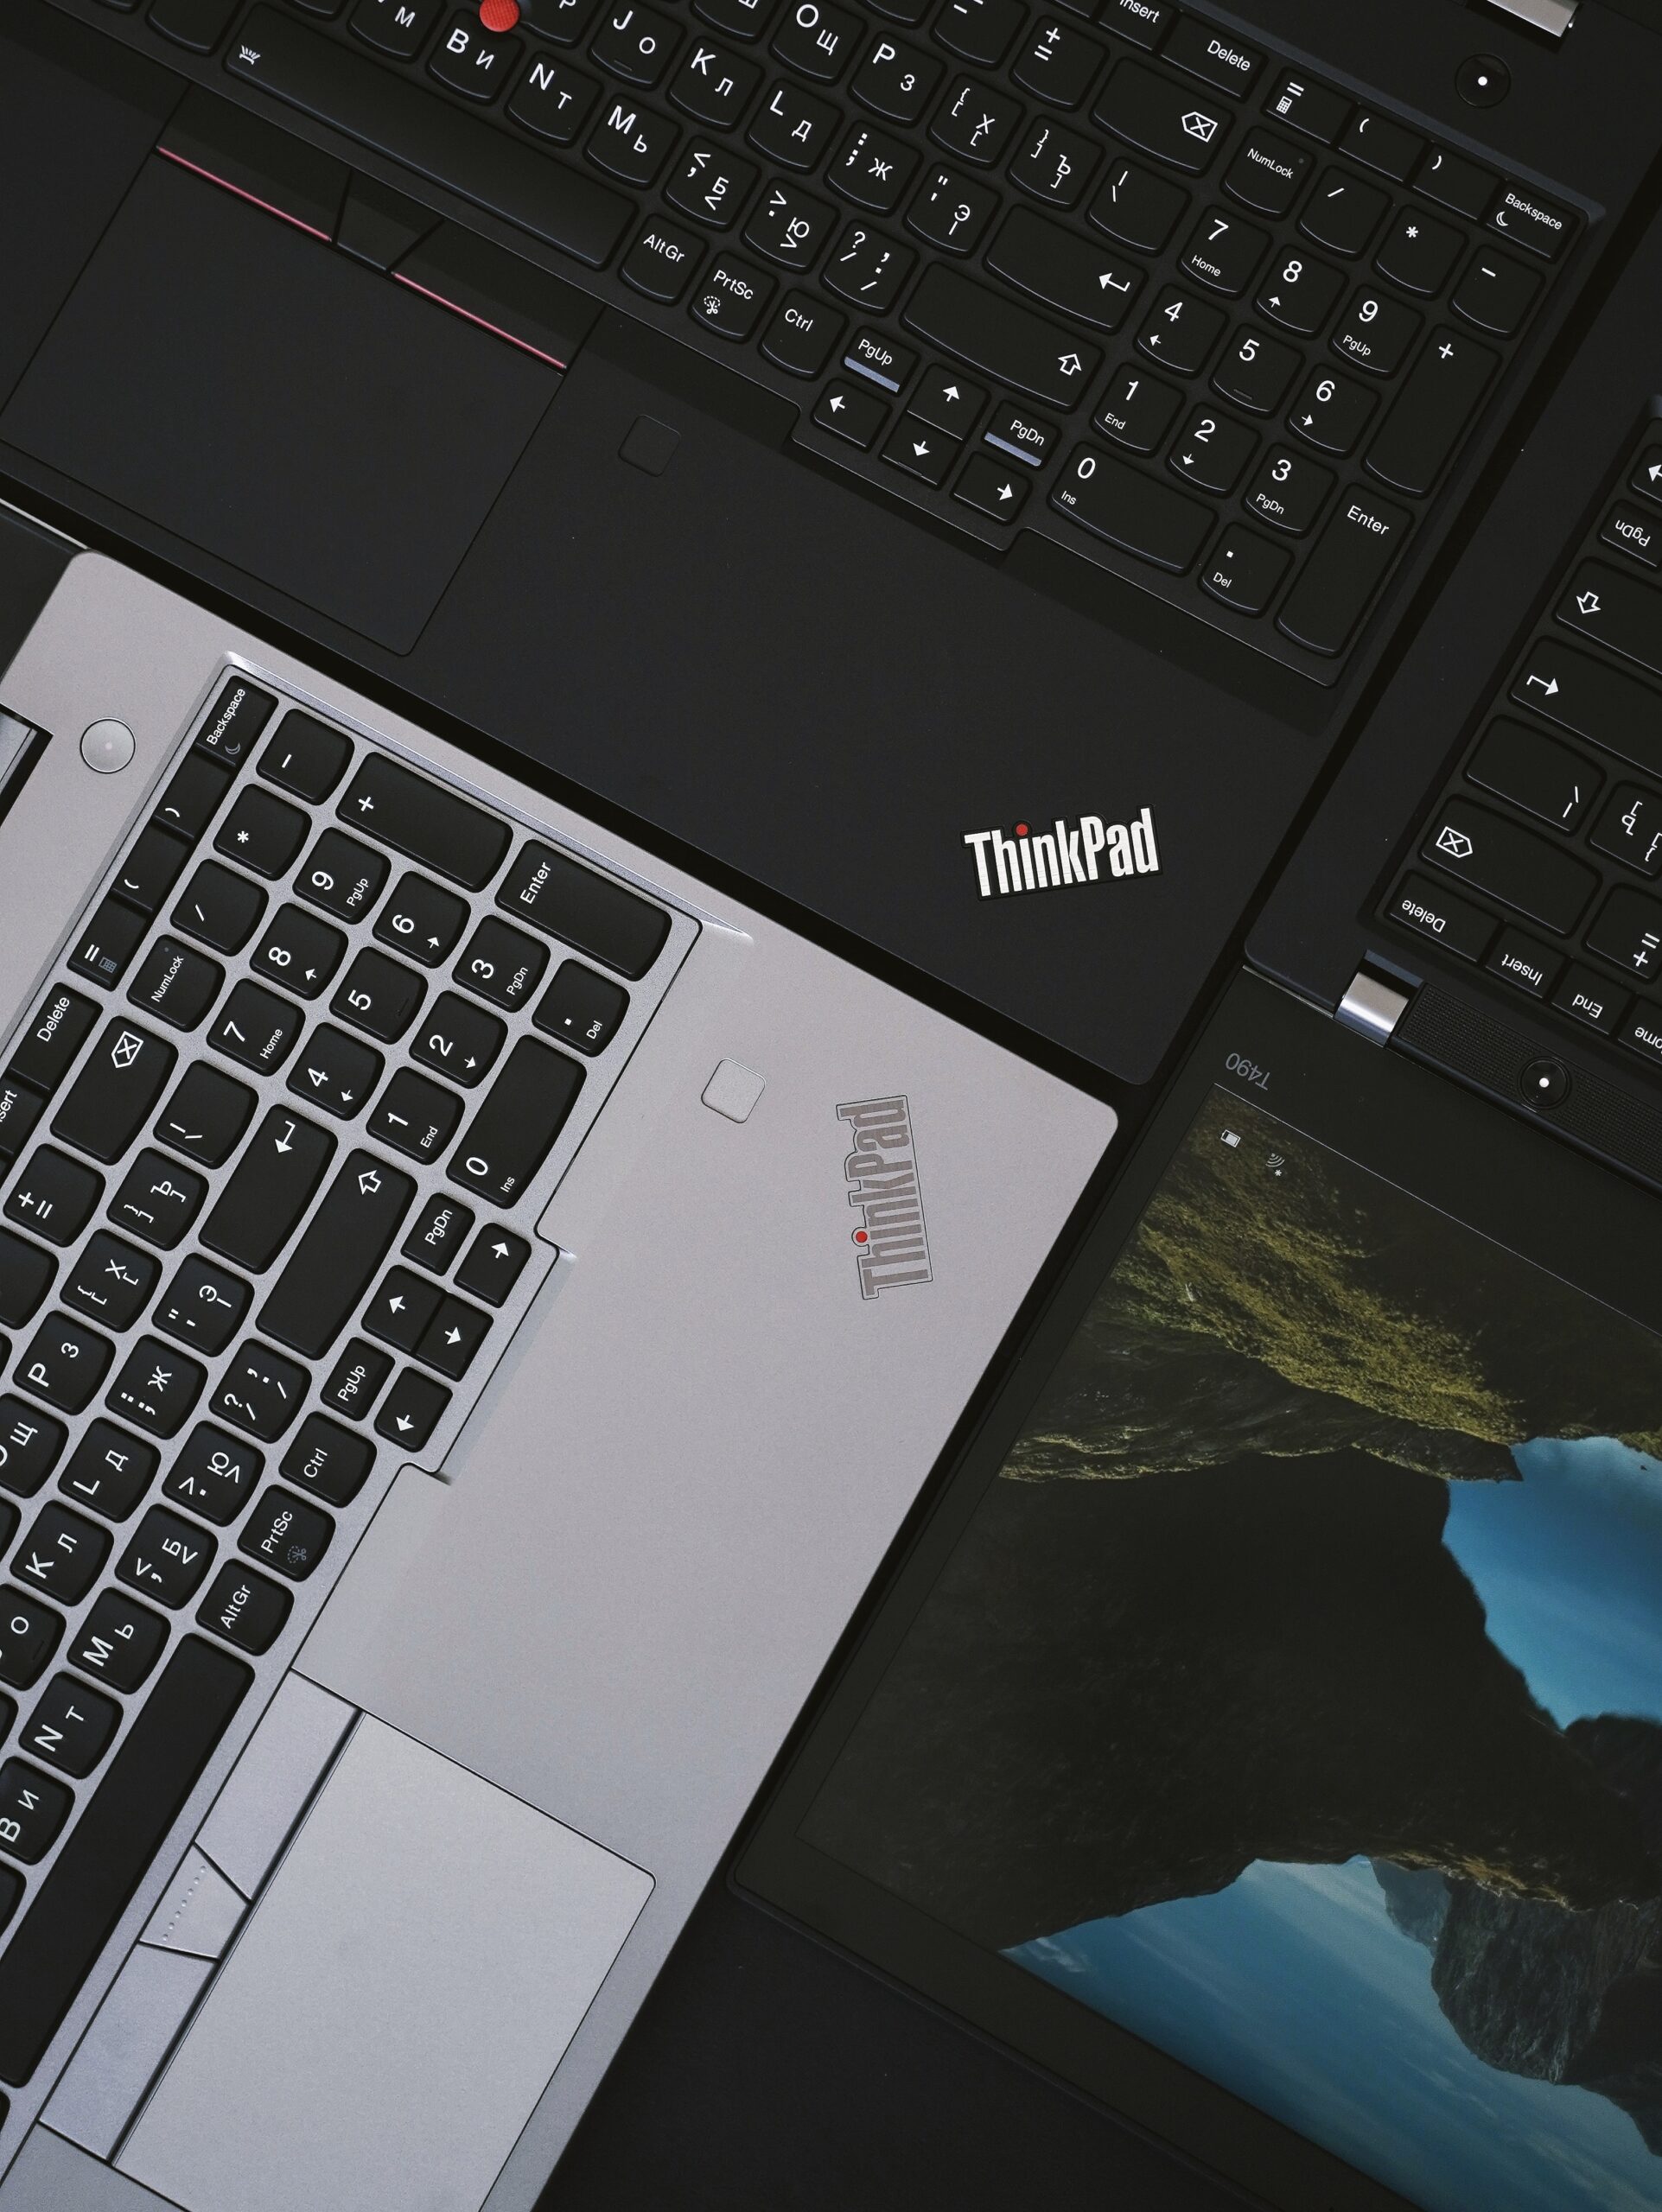 Lenovo introduces a number of new ThinkPad laptops with 10th generation Intel H-series processors